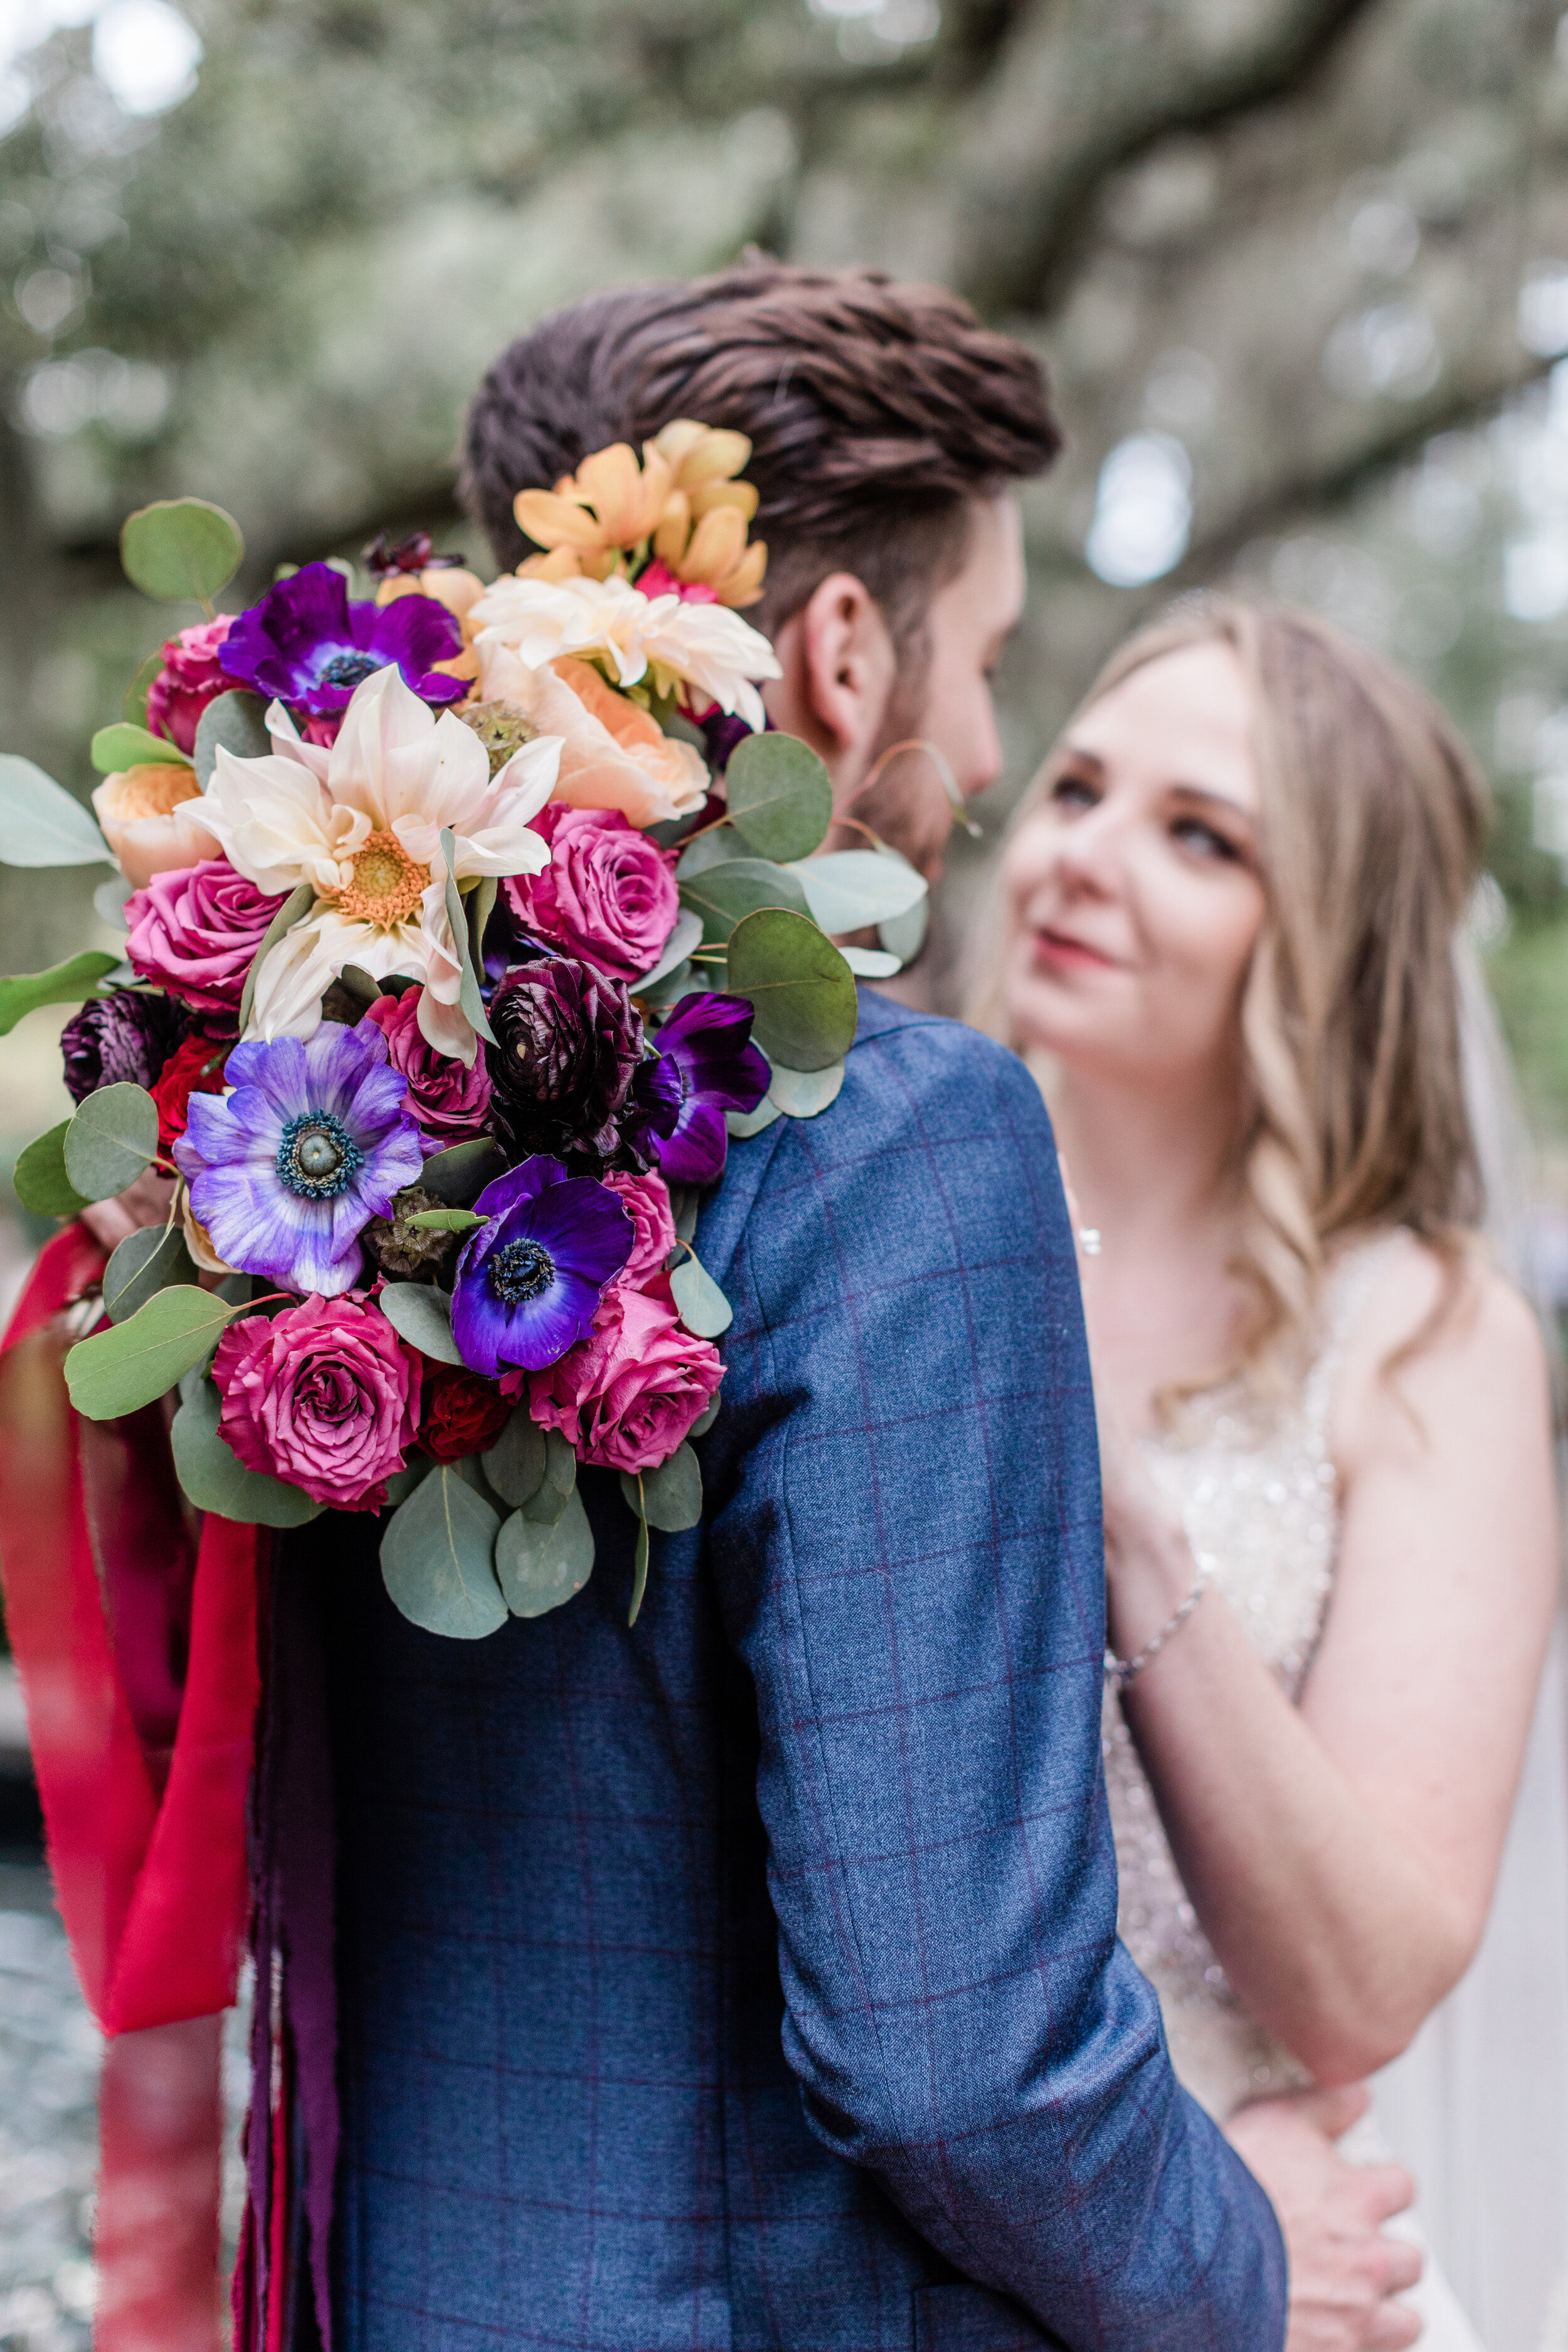 ivory-and-beau-florals-ashley-and-gerald-elopement-flowers-elope-savannah-elopement-package-flowers-florals-florist-savannah-florist-wedding-florist-bright-colorful-flowers-AptBPhoto_AshleyGerard-175.jpg